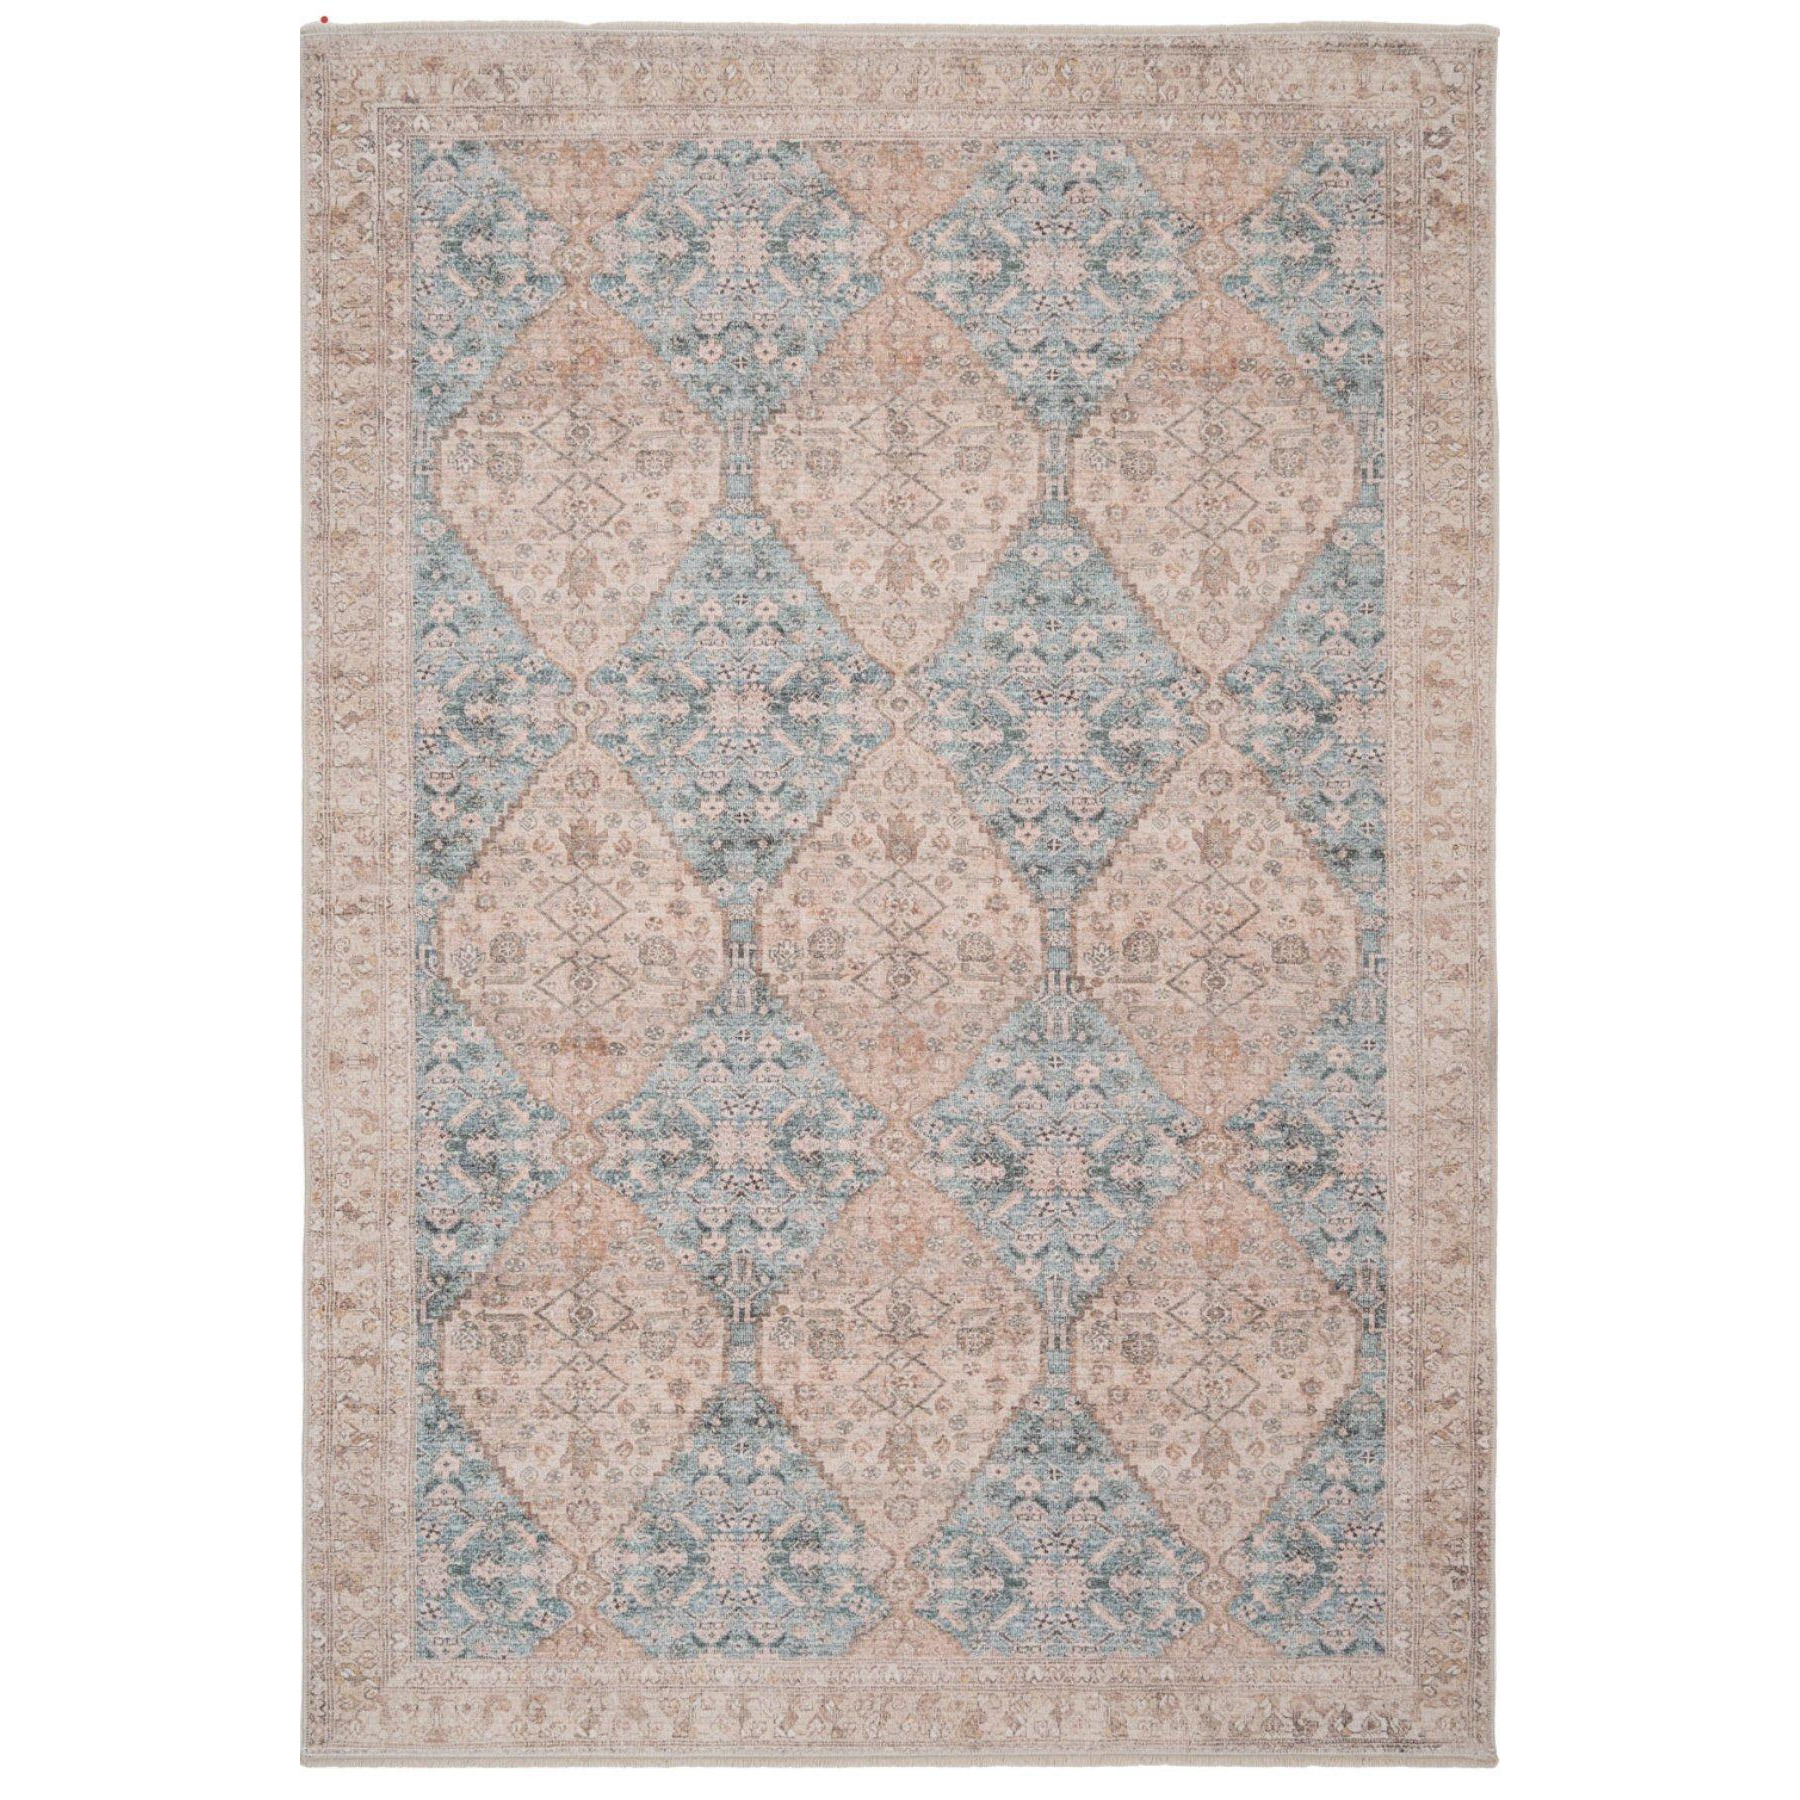 Blue Beige Traditional Pattern Distressed Living Area Rug - image 1